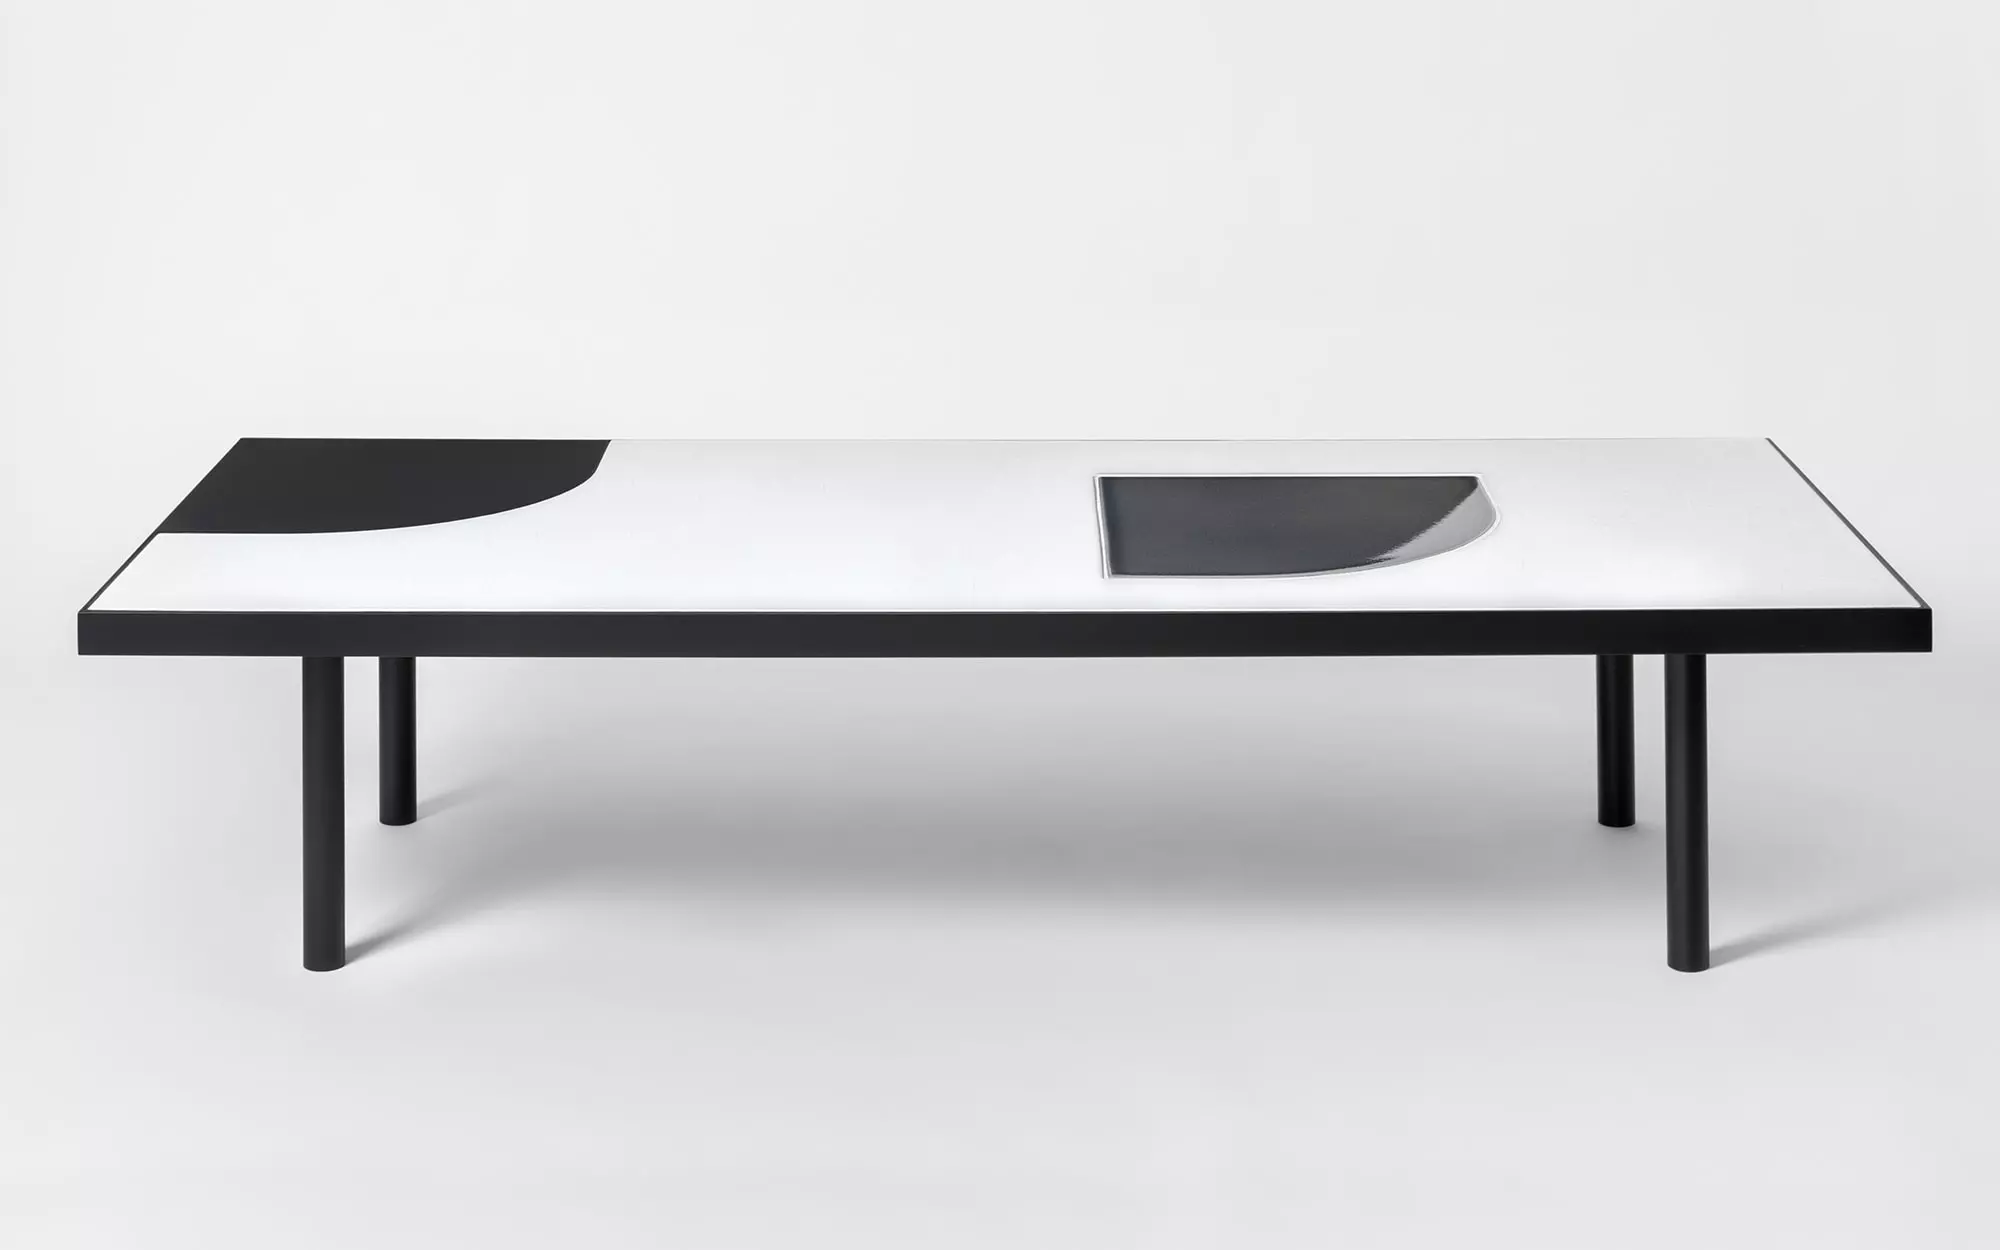 Translation Quadro Coffee Table - Pierre Charpin - Art and Drawing - Galerie kreo